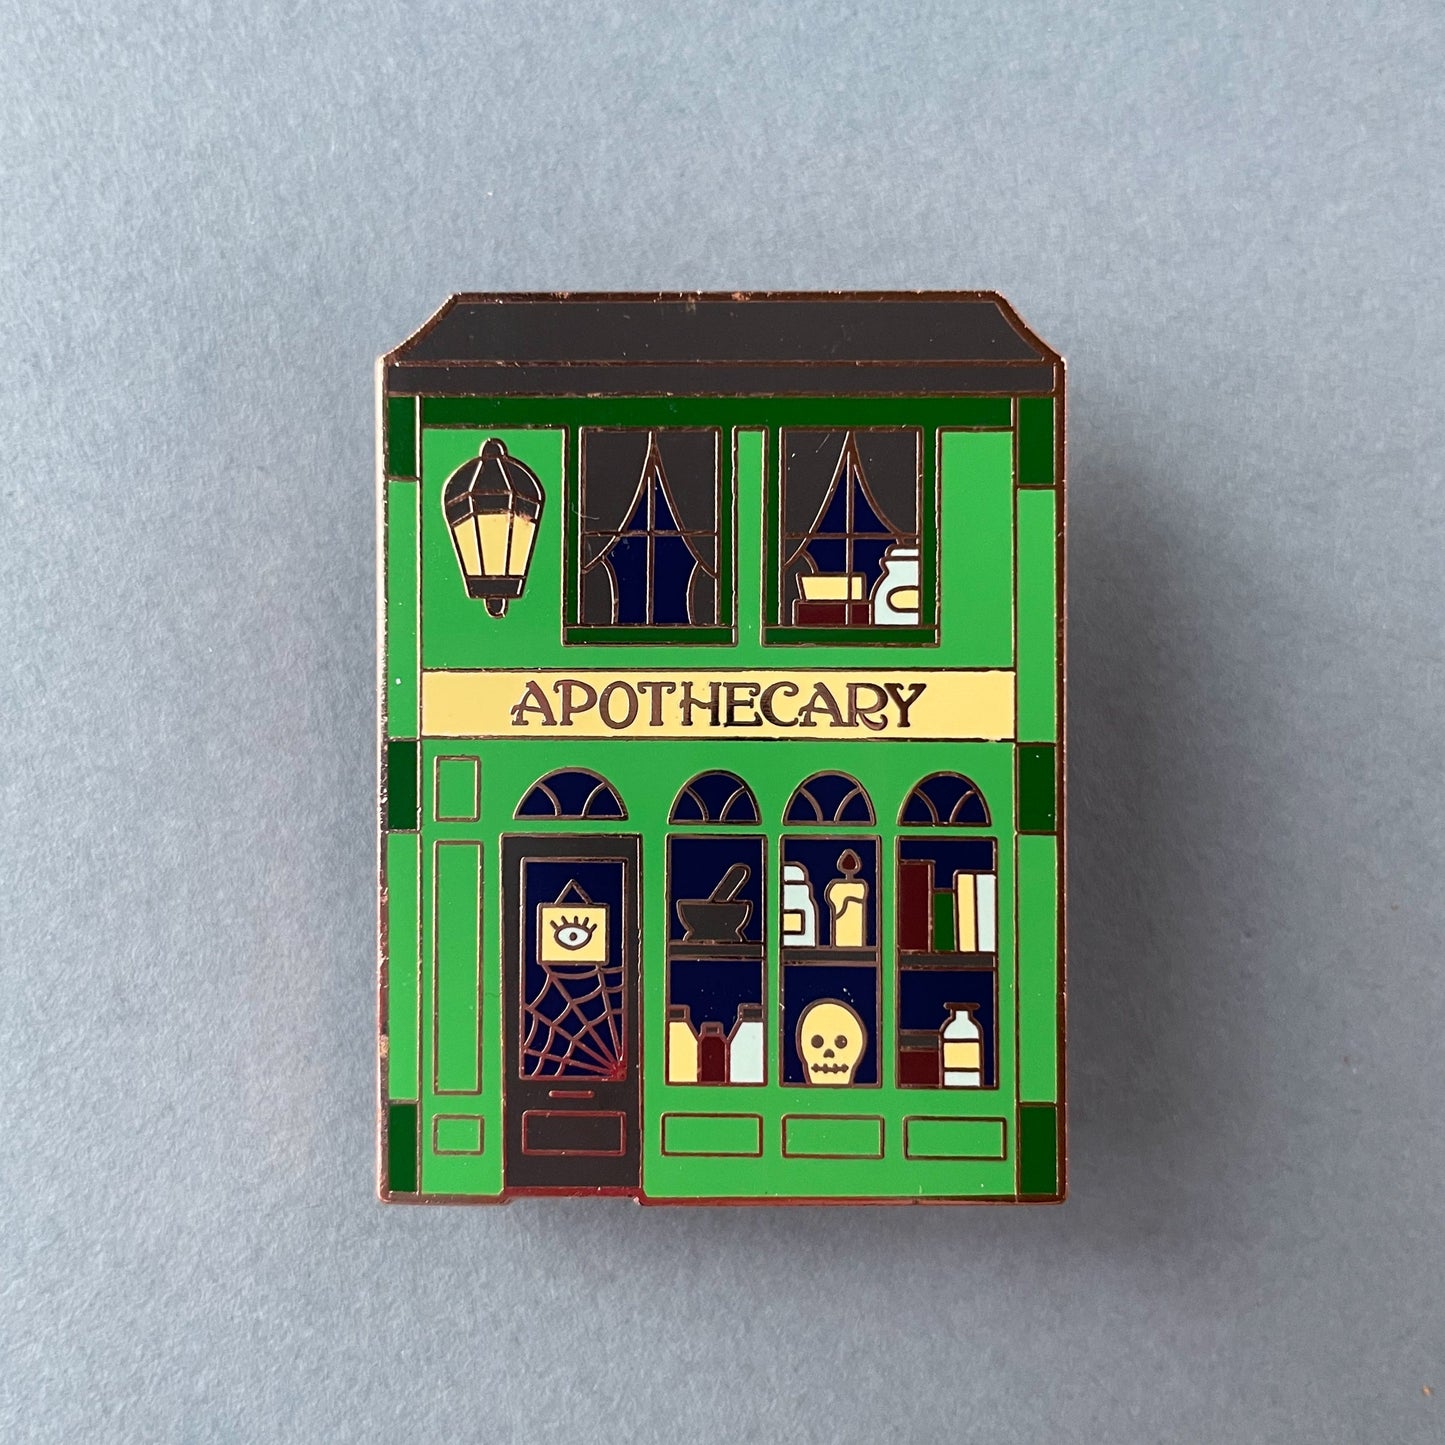 An enamel pin shaped like an Apothecary store front on top of a grey background.